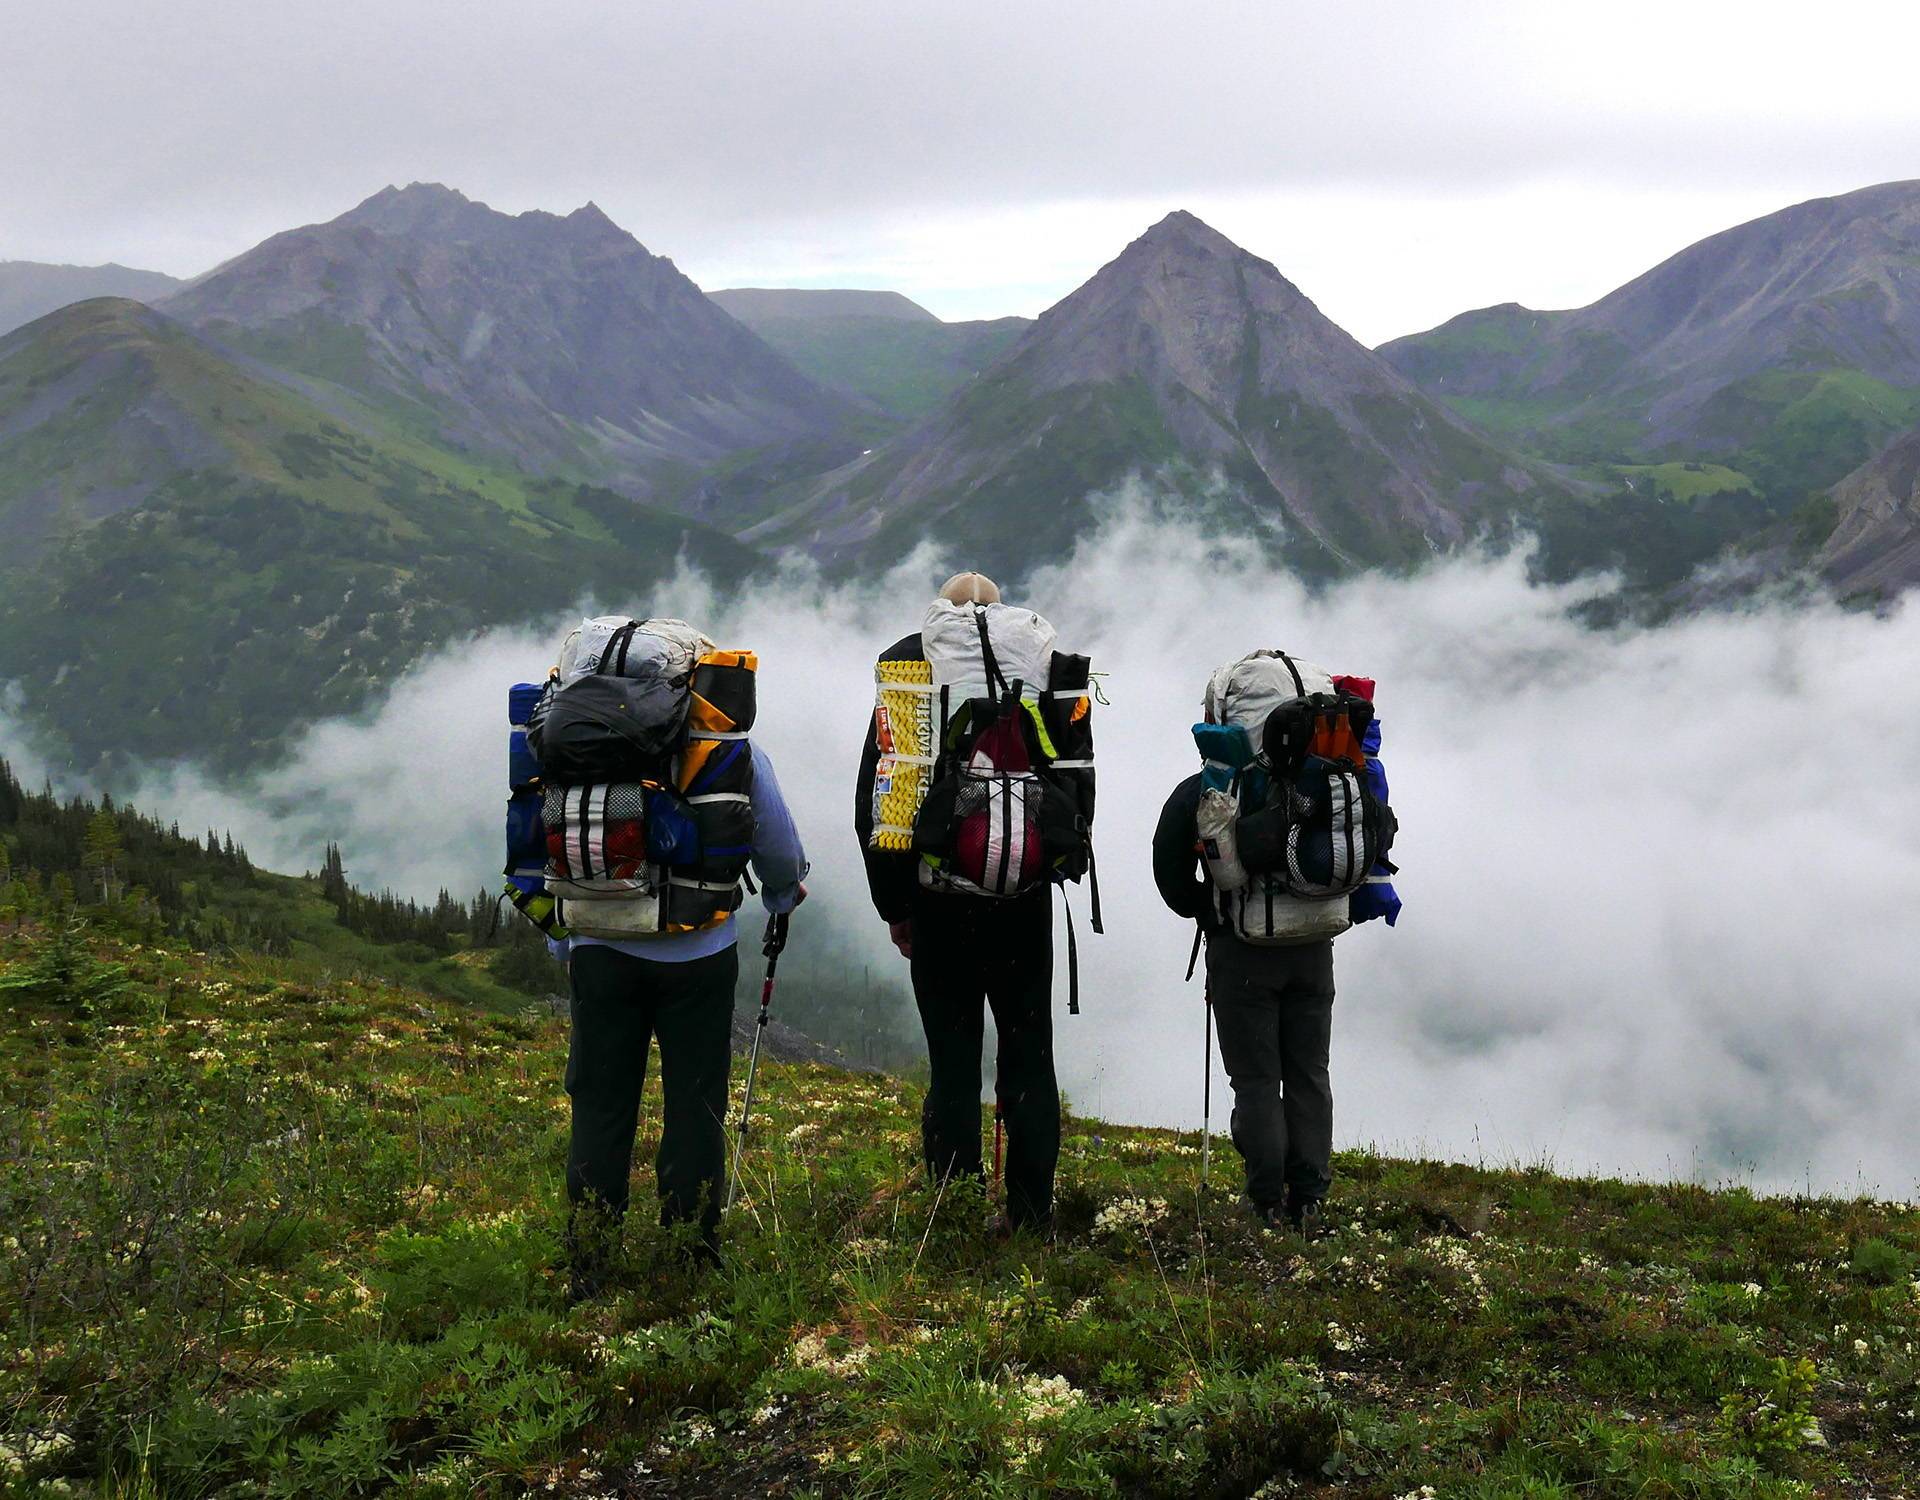 A group of people with backpacks standing on a mountain.